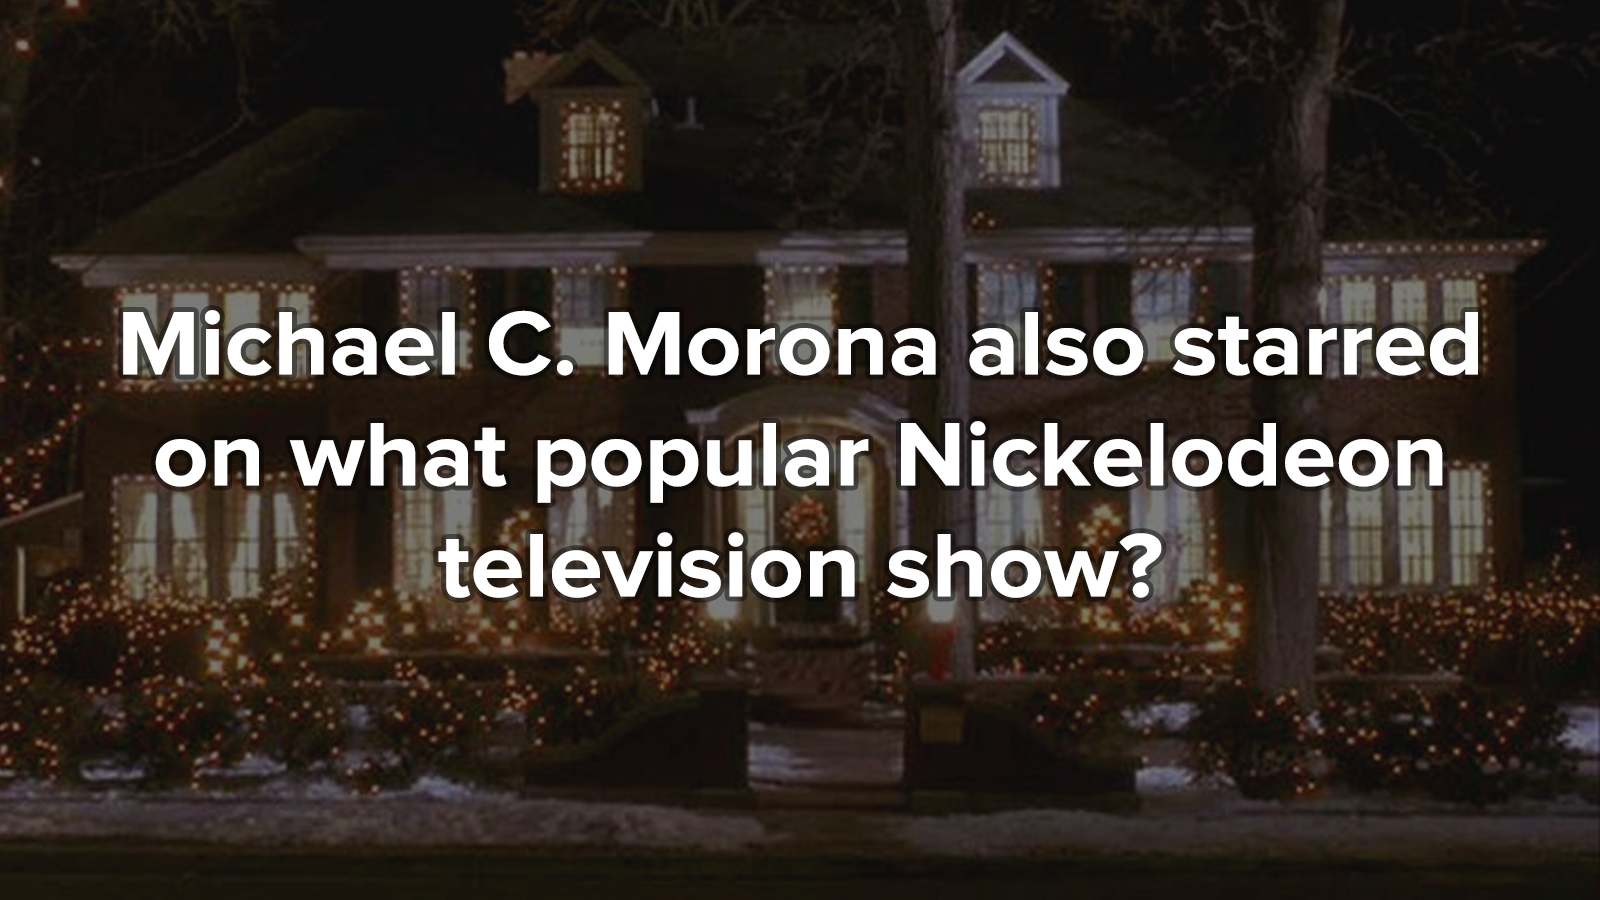 The Daily Crate | EDUCRATED QUIZ: Home Alone Trivia